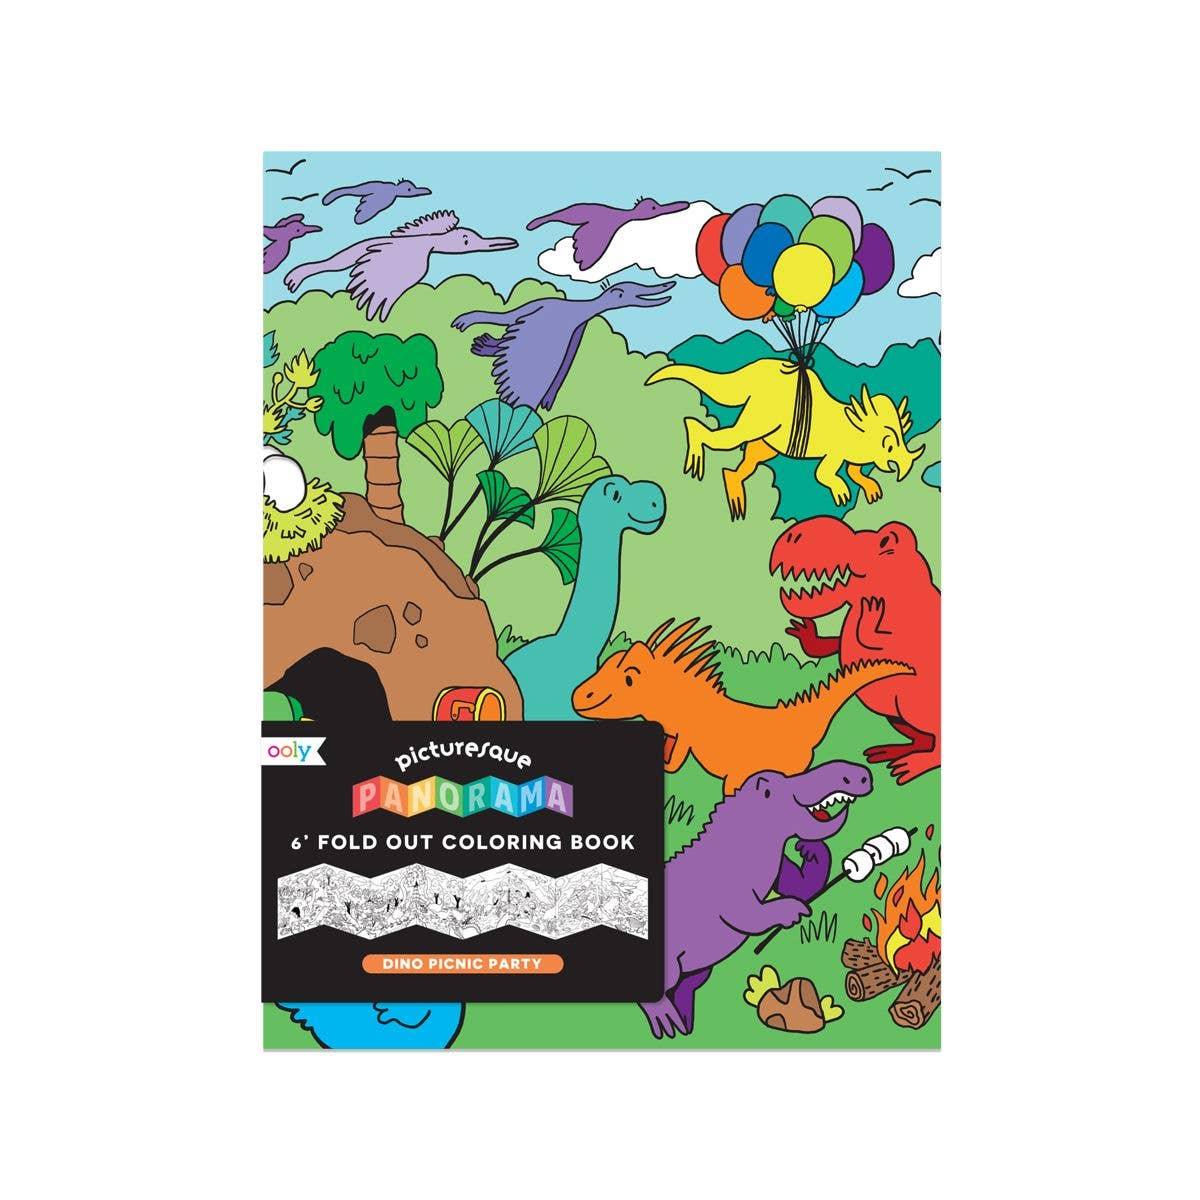 Dino Picnic Party Picturesque Panorama Coloring Book